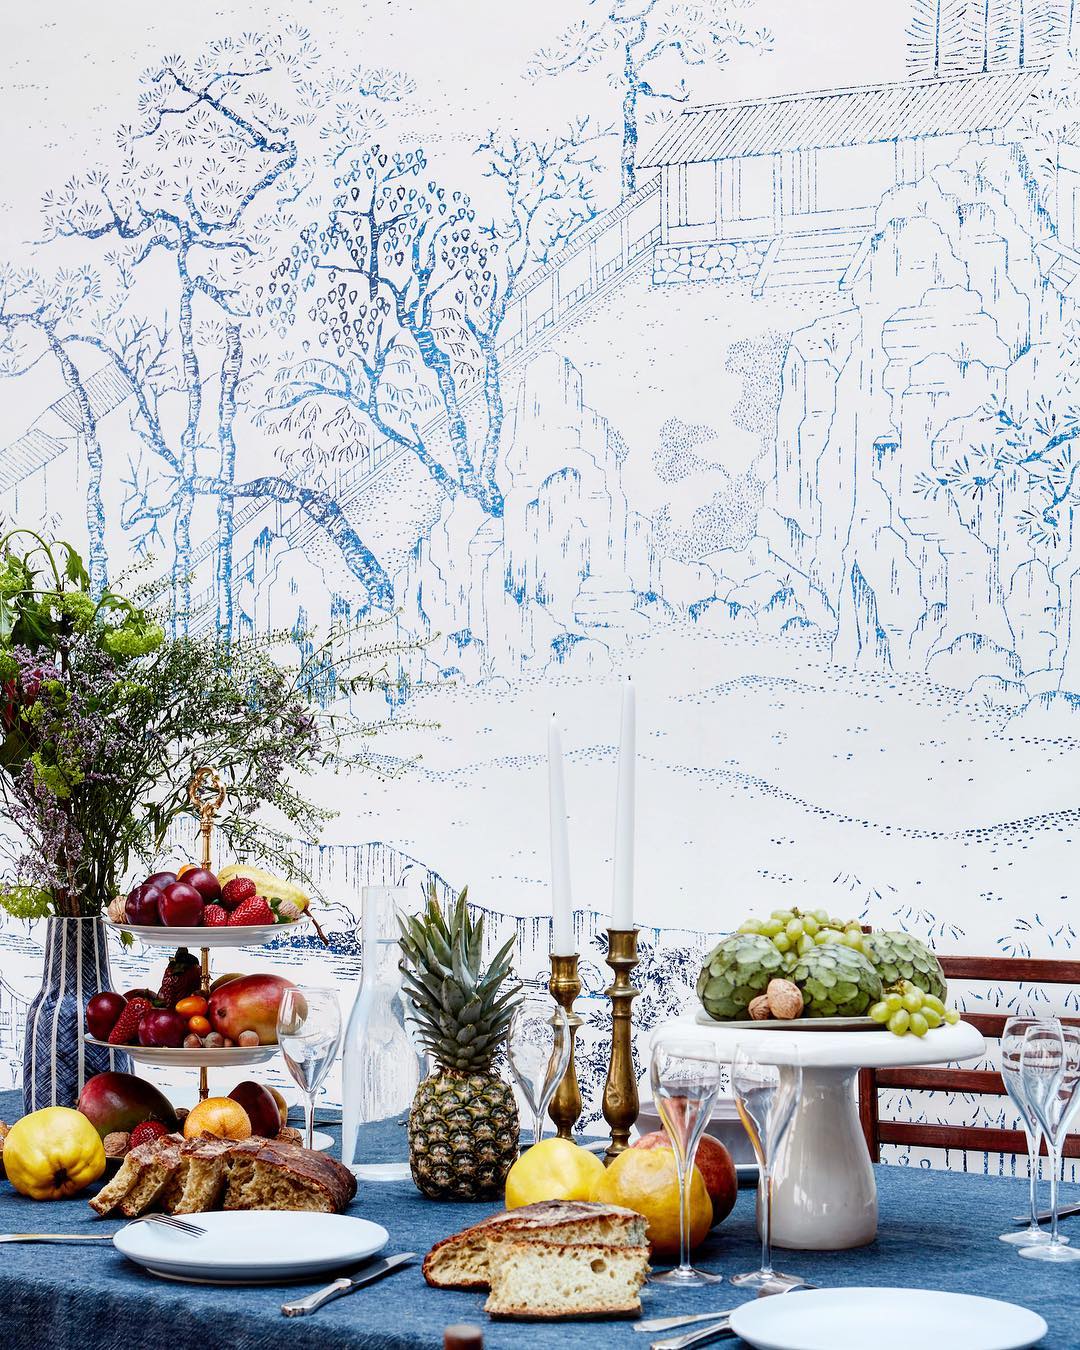 Design Made In France - Exquisite Panoramic Wall Murals For Your Next Interior Renovation